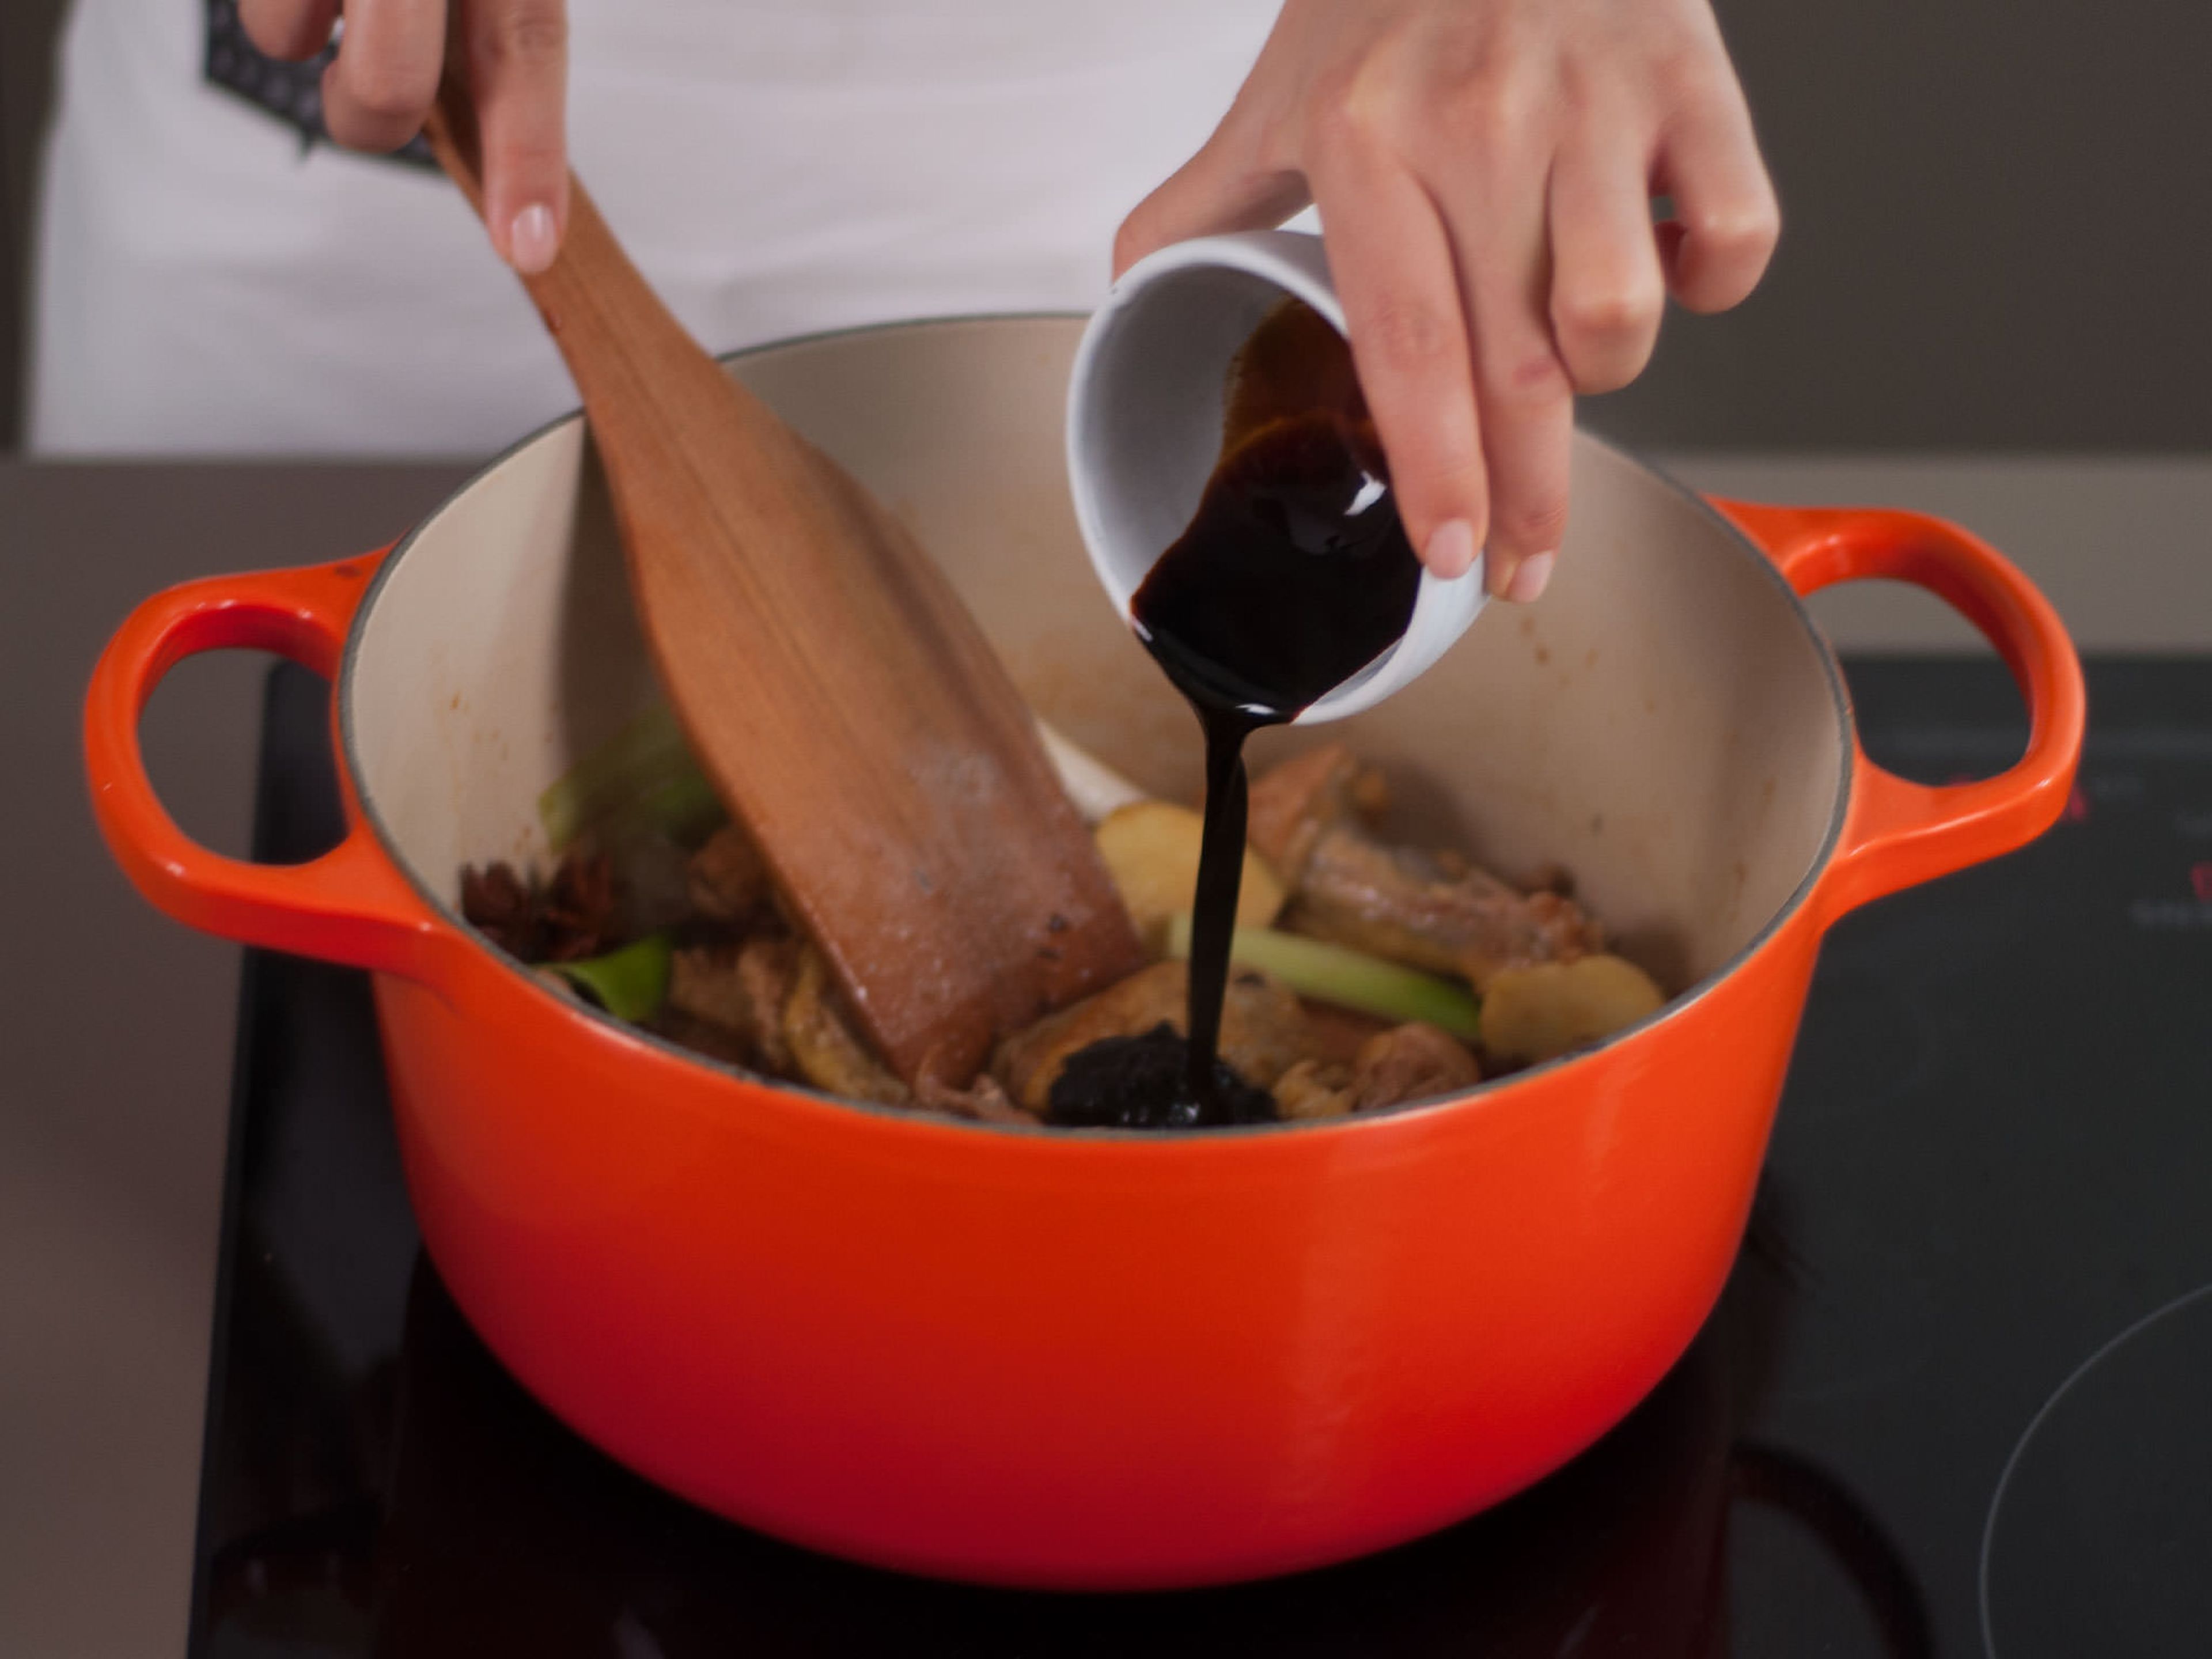 Add white wine as well as light and dark soy sauces to saucepan. Stir to coat chicken and vegetables, cover with a lid, and let cook for approx. 1 – 2 min.